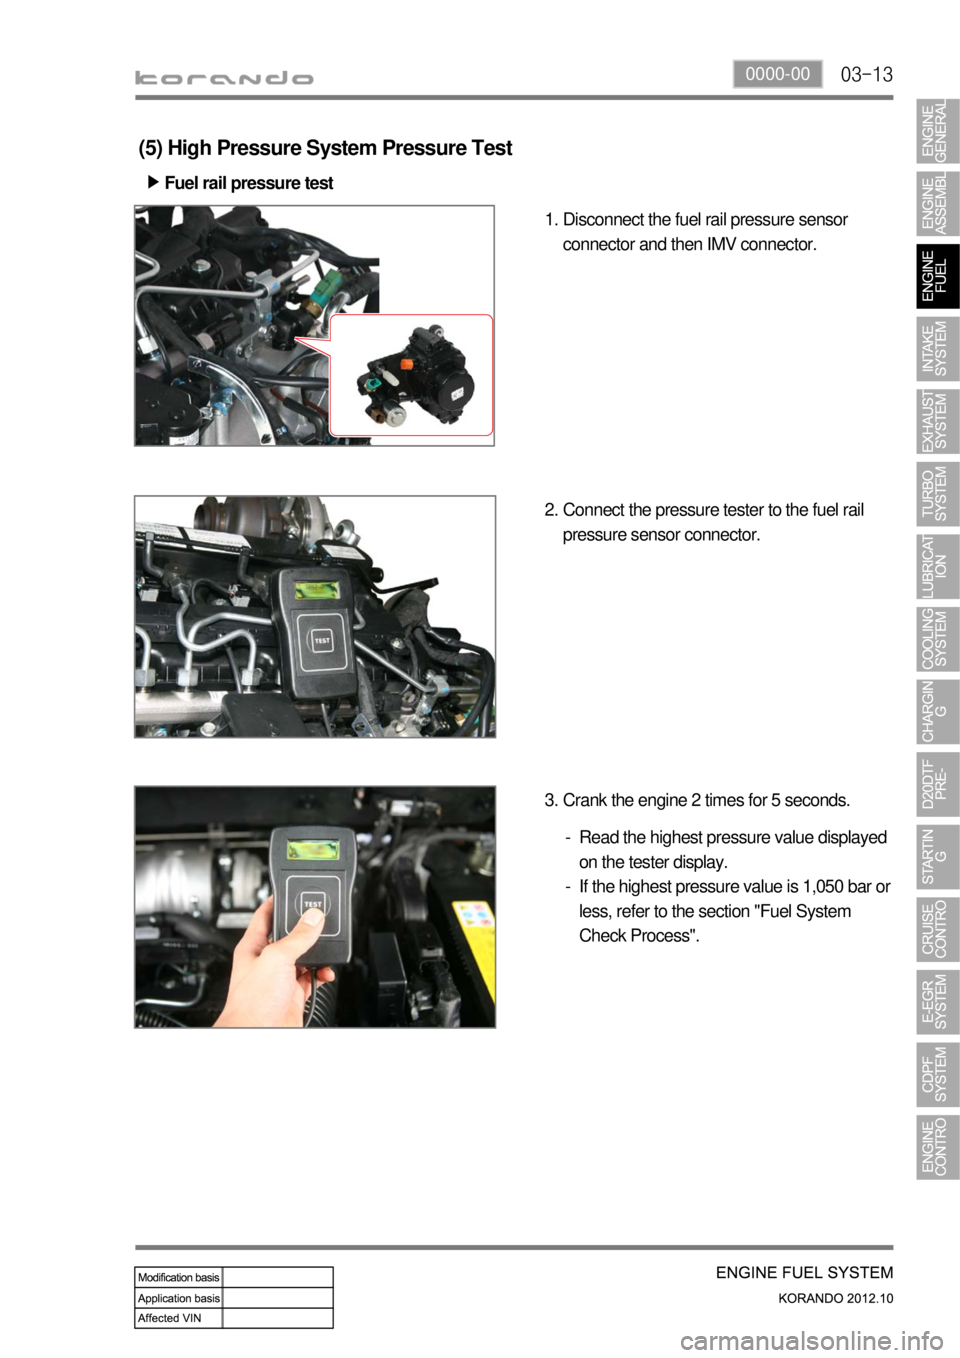 SSANGYONG KORANDO 2012  Service Manual 03-130000-00
(5) High Pressure System Pressure Test
Fuel rail pressure test ▶
Disconnect the fuel rail pressure sensor 
connector and then IMV connector. 1.
Connect the pressure tester to the fuel r